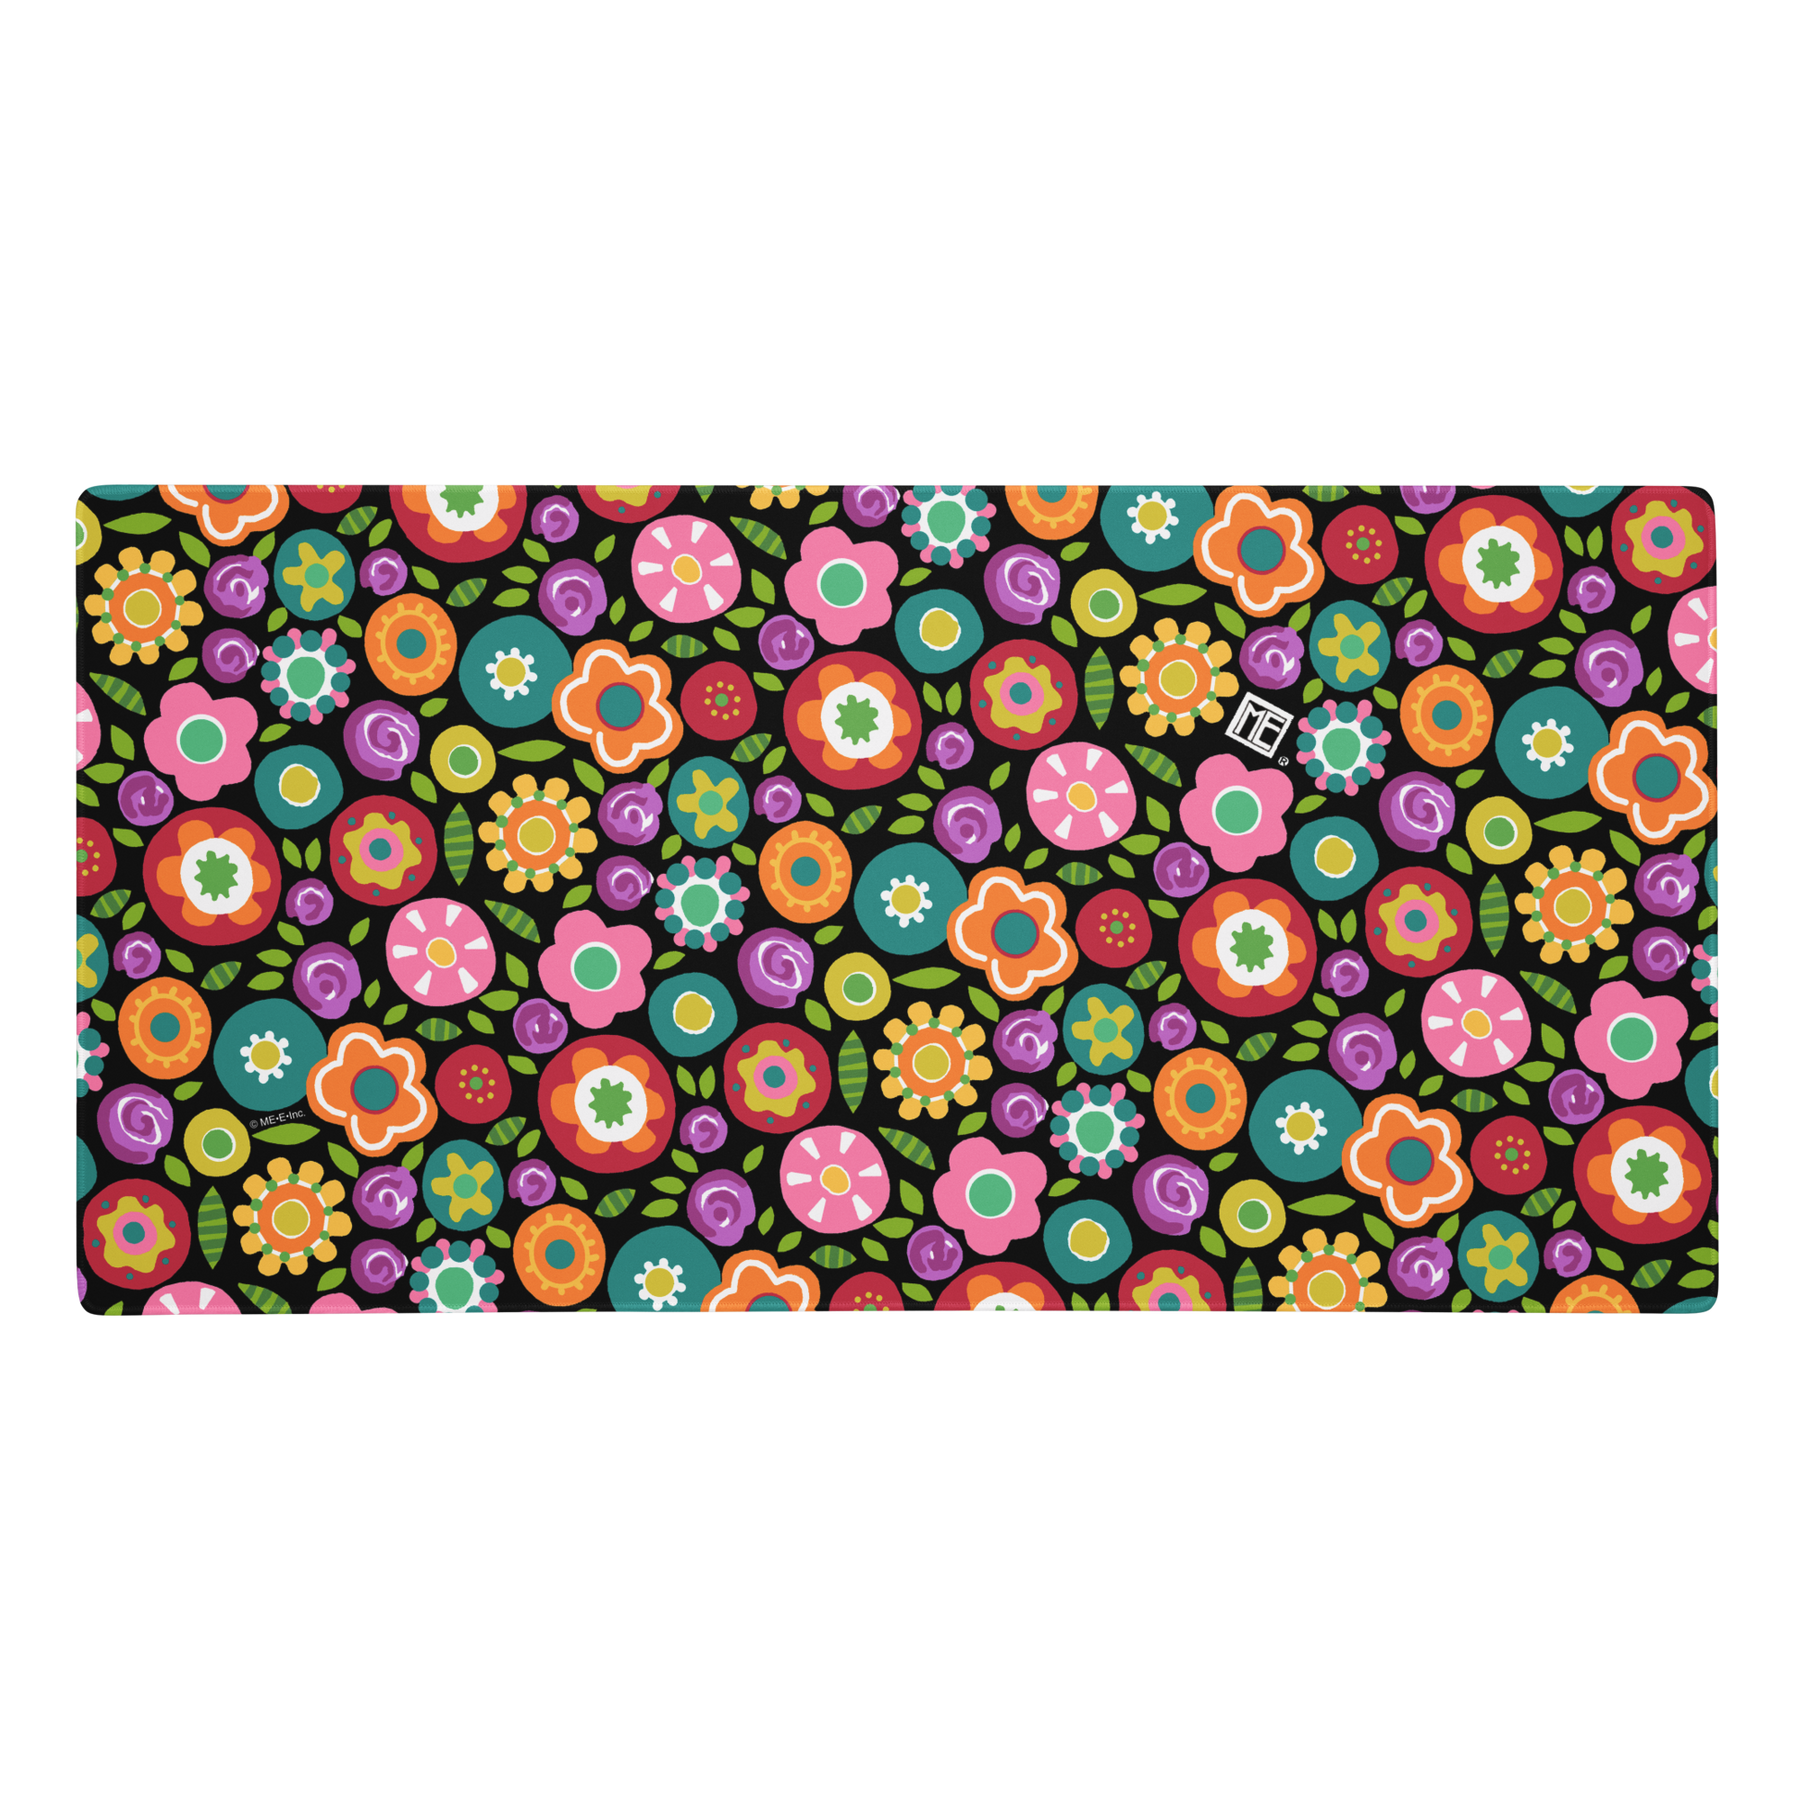 Rainbow Floral Deluxe Desk Pad